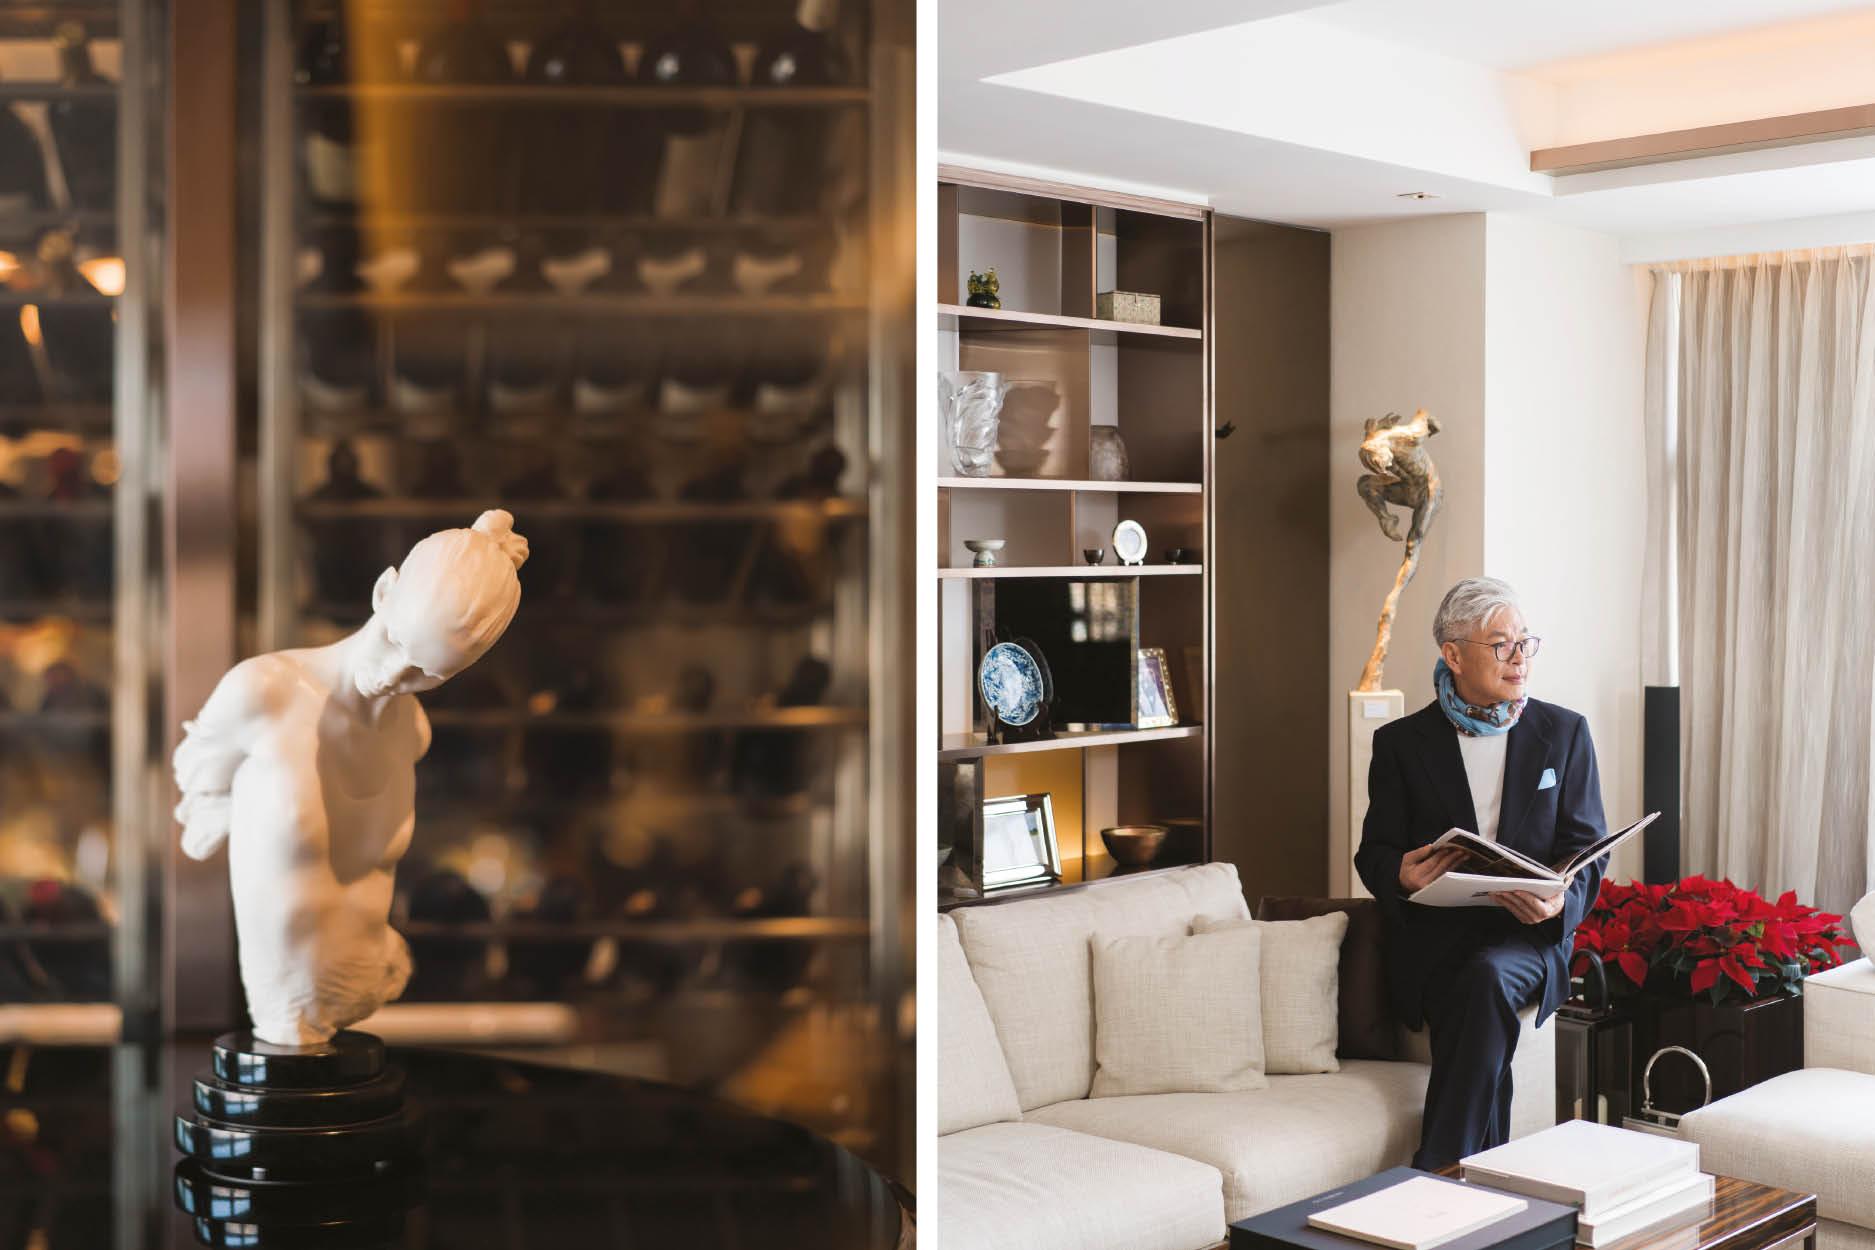 Lighting Designer Tino Kwan’s Exquisite Home Shines with Charm and Elegance